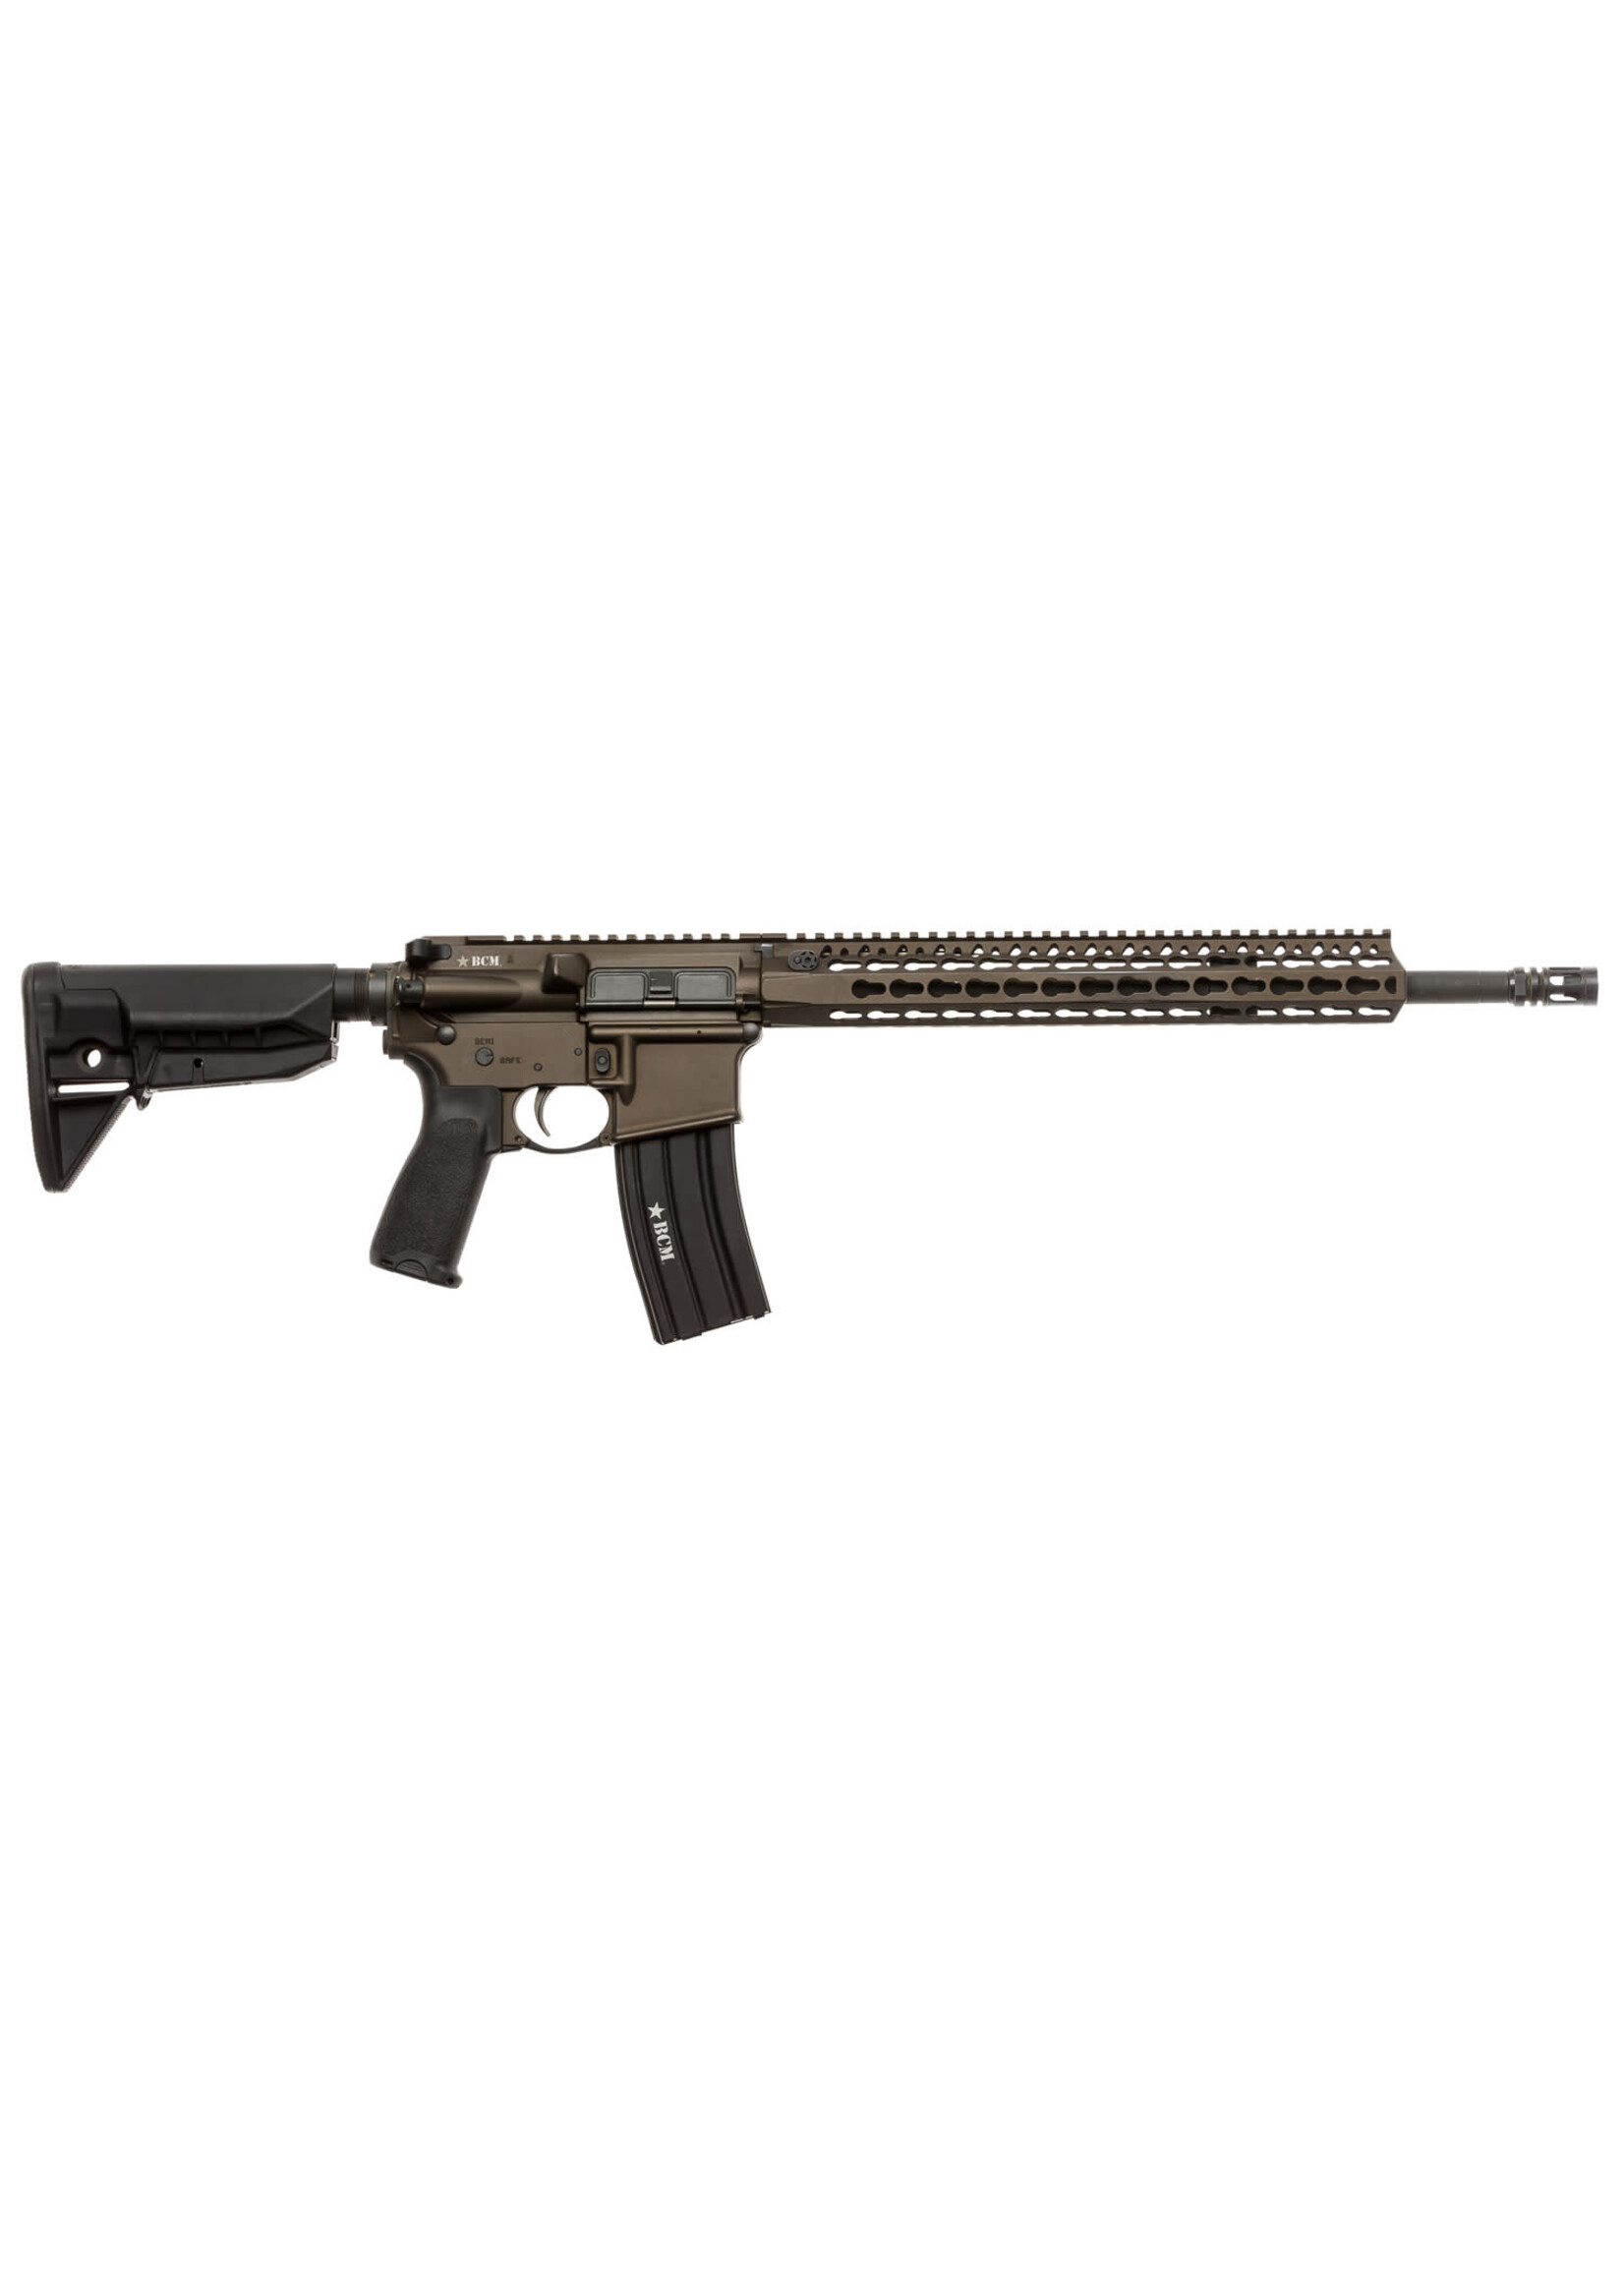 Bravo Company Mfg SPECIAL ORDER BCM 750790BRZ RECCE-16 KMR-A 223 Rem/5.56x45mm NATO 30+1 16" Government Profile Steel Barrel, Mod 0 Compensator, Bronze Cerakote Finished 7075-T6 Receiver, Synthetic 6 Position Stock, Bravo Mod 3 Grip, Ambidextrous Safety